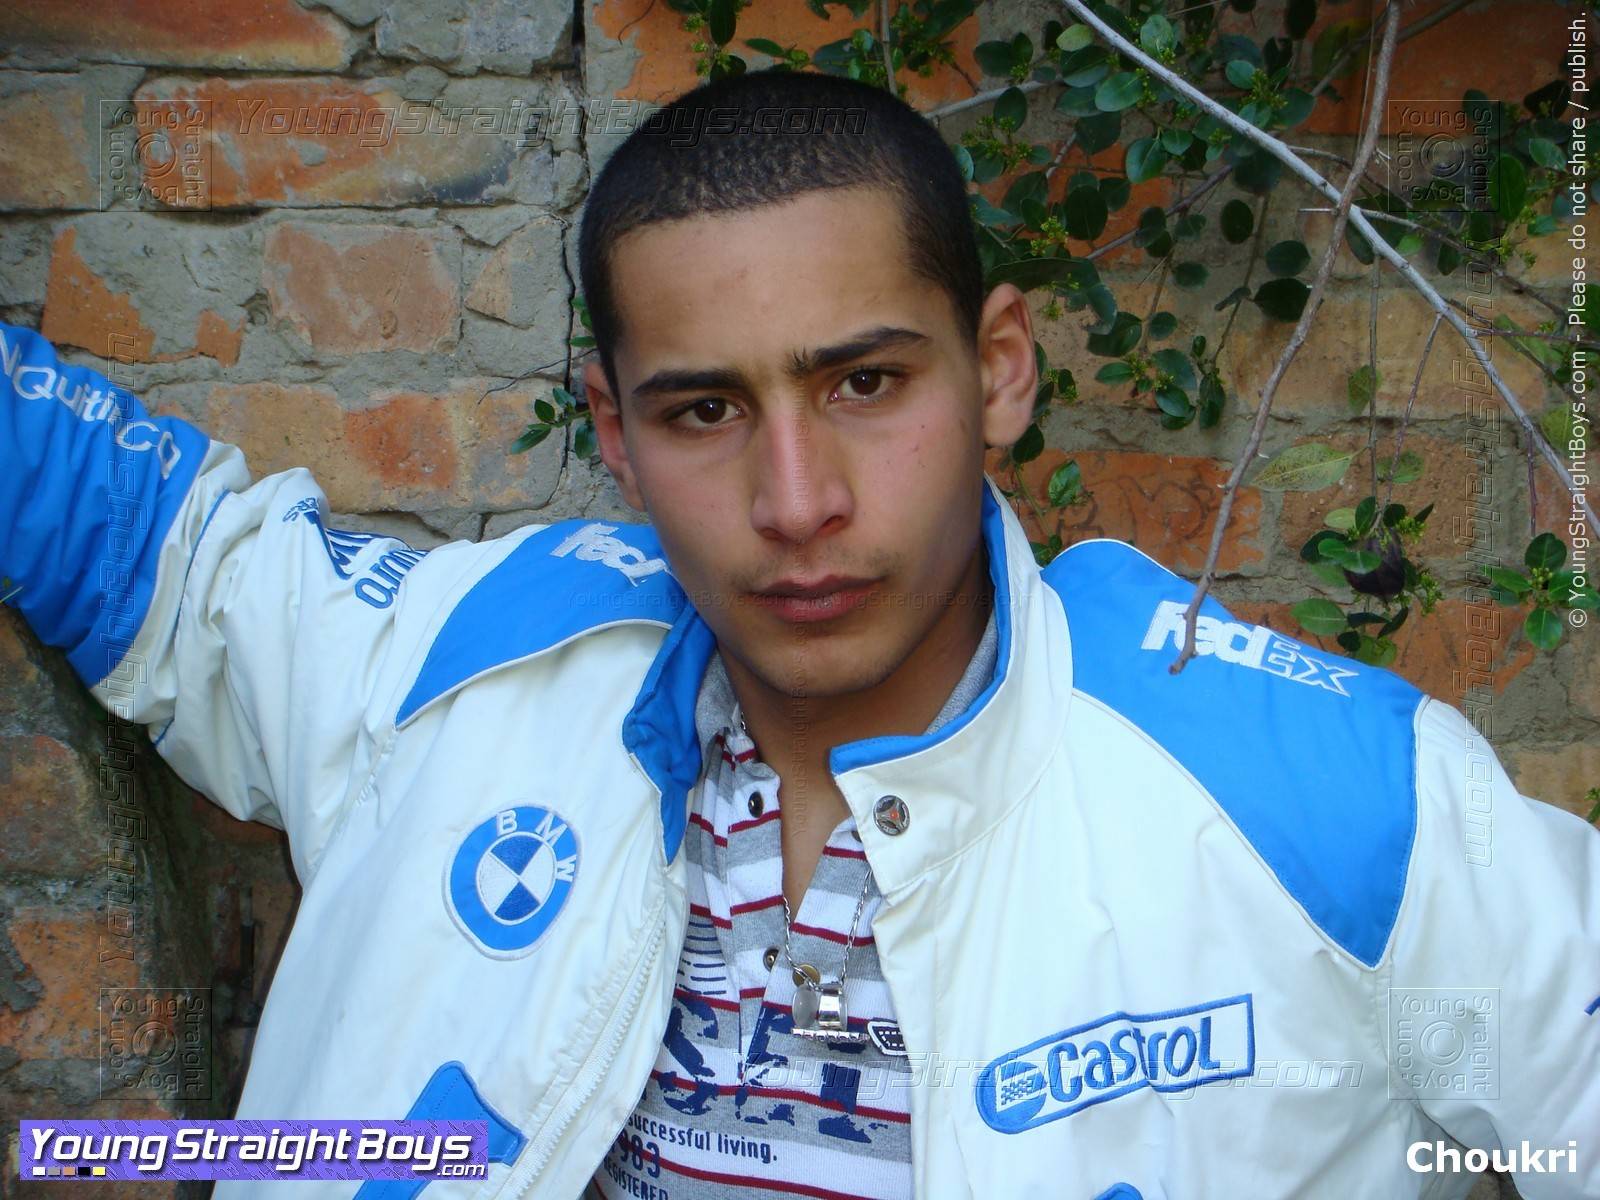 Aici, Choukri (a cute 'rogue' Arab straight boy) is posing in front of an old wall